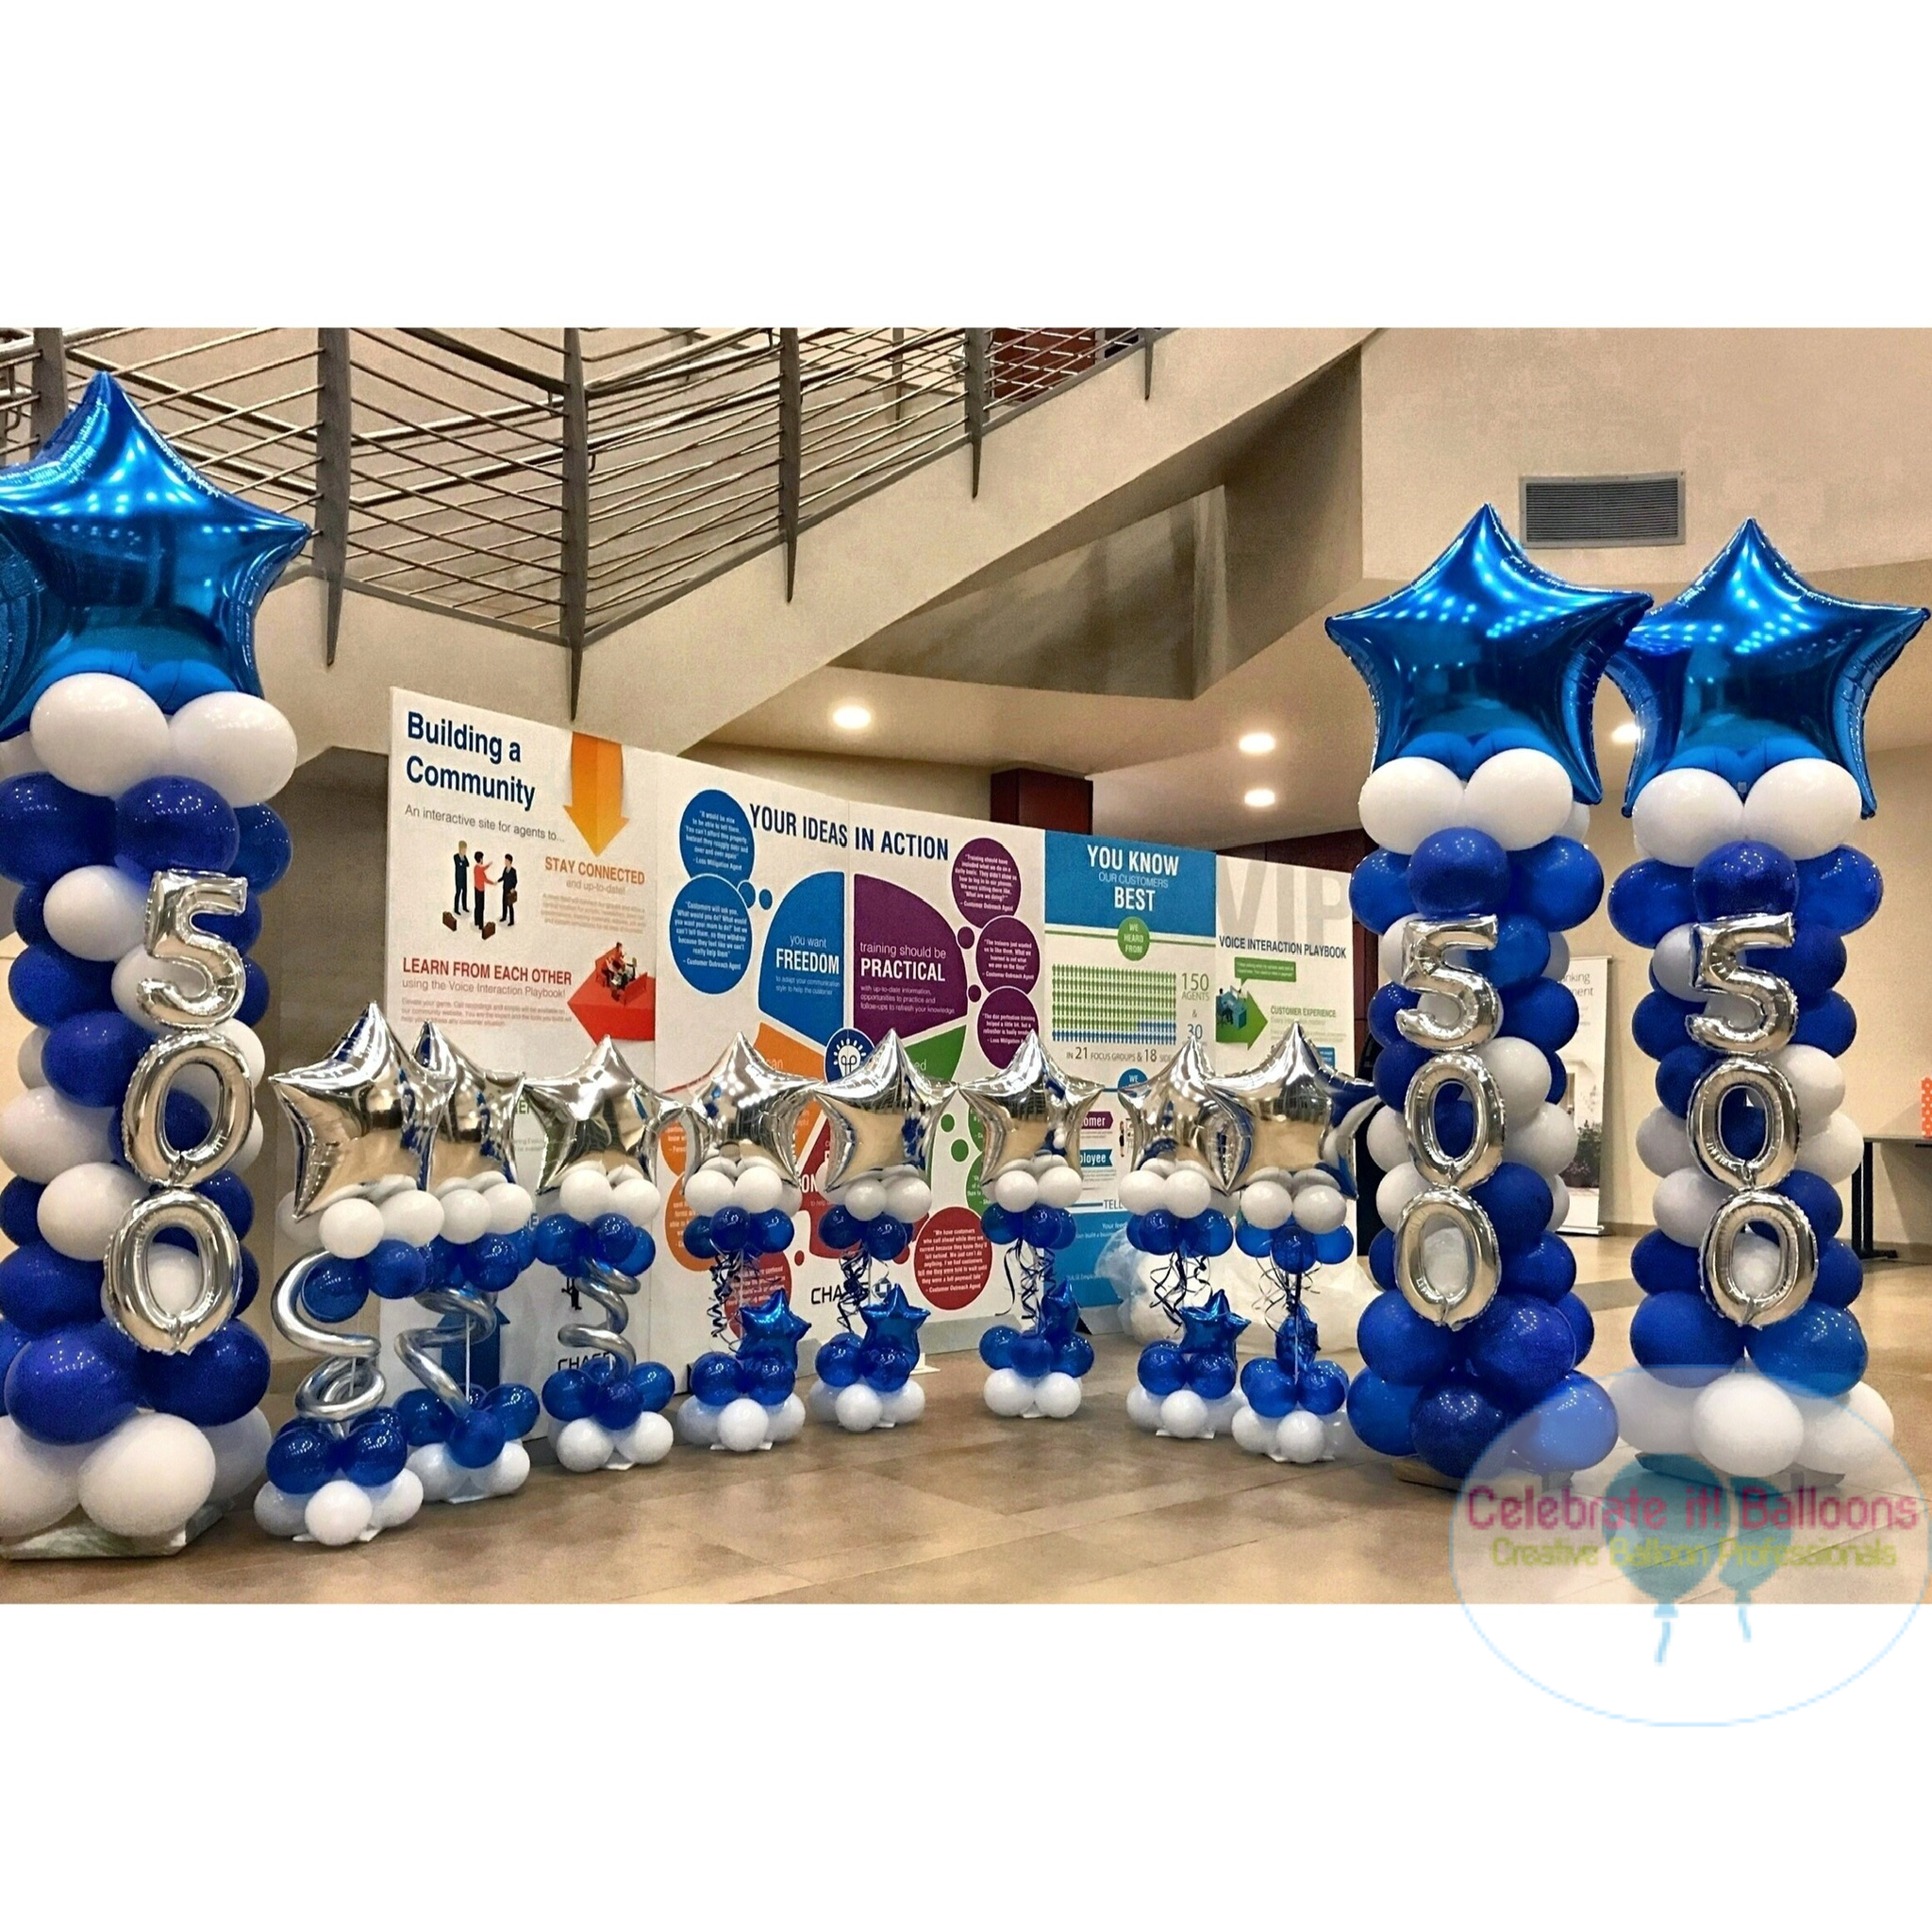 Royal blue, white and silver balloon centerpiece on a stand